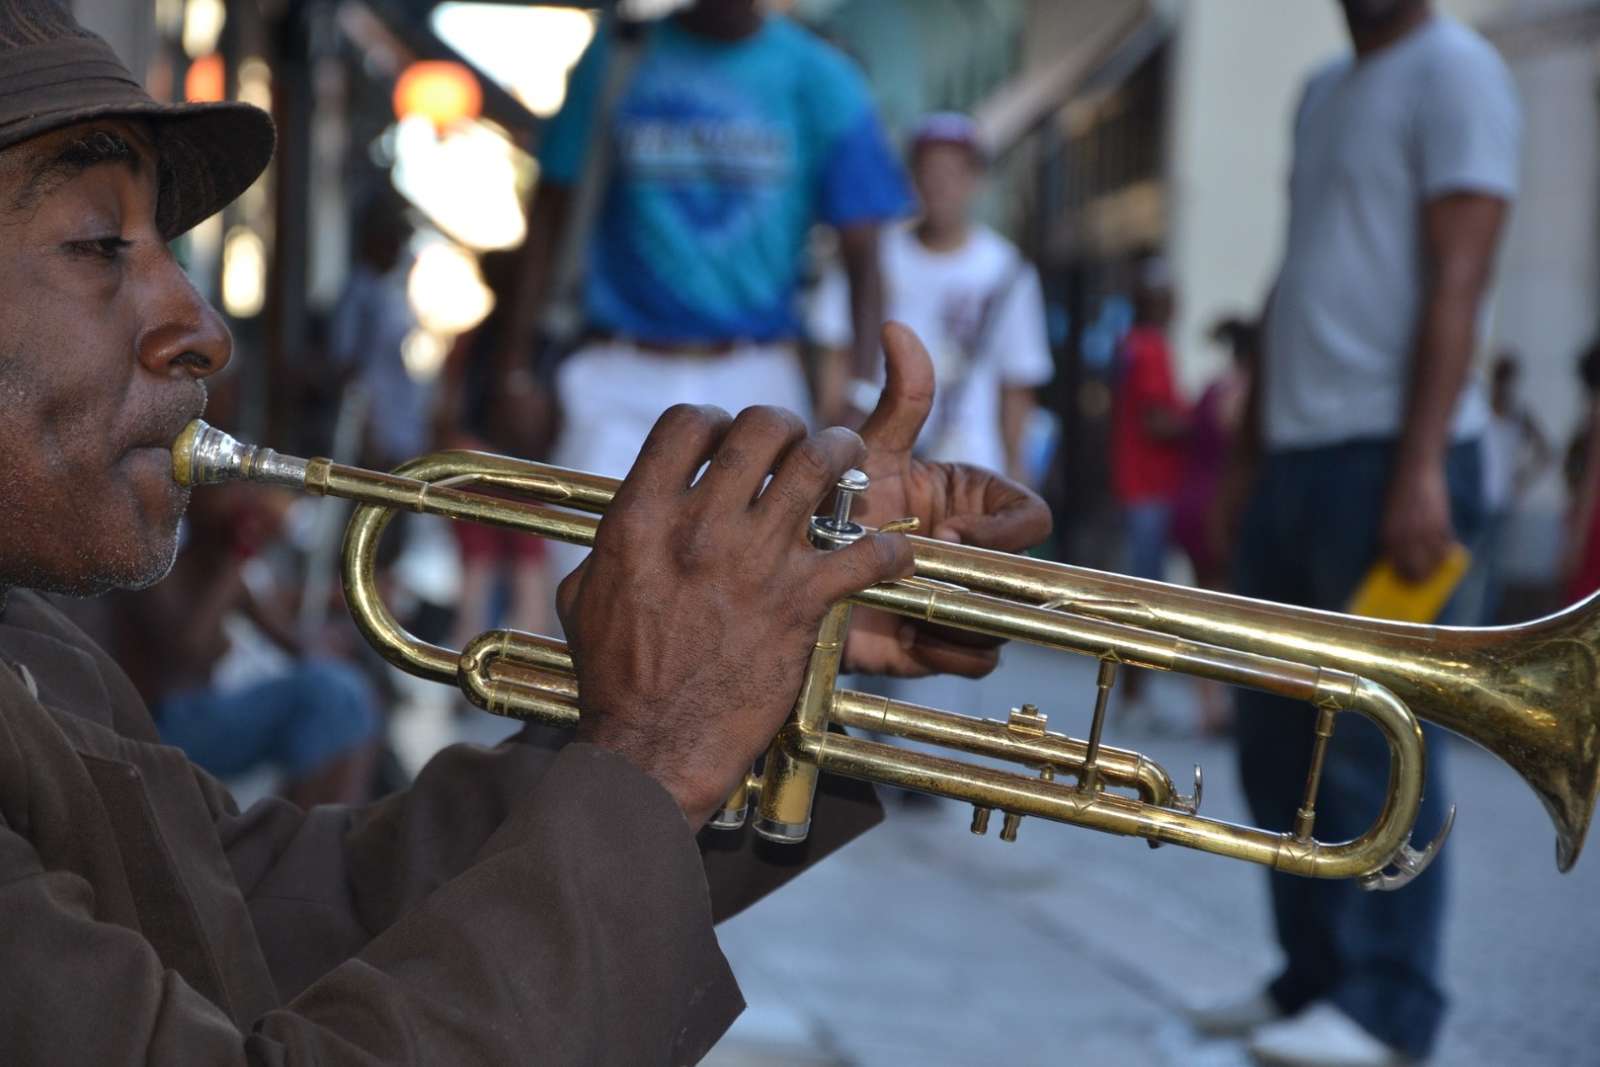 A man playing a trumpet in Cuba